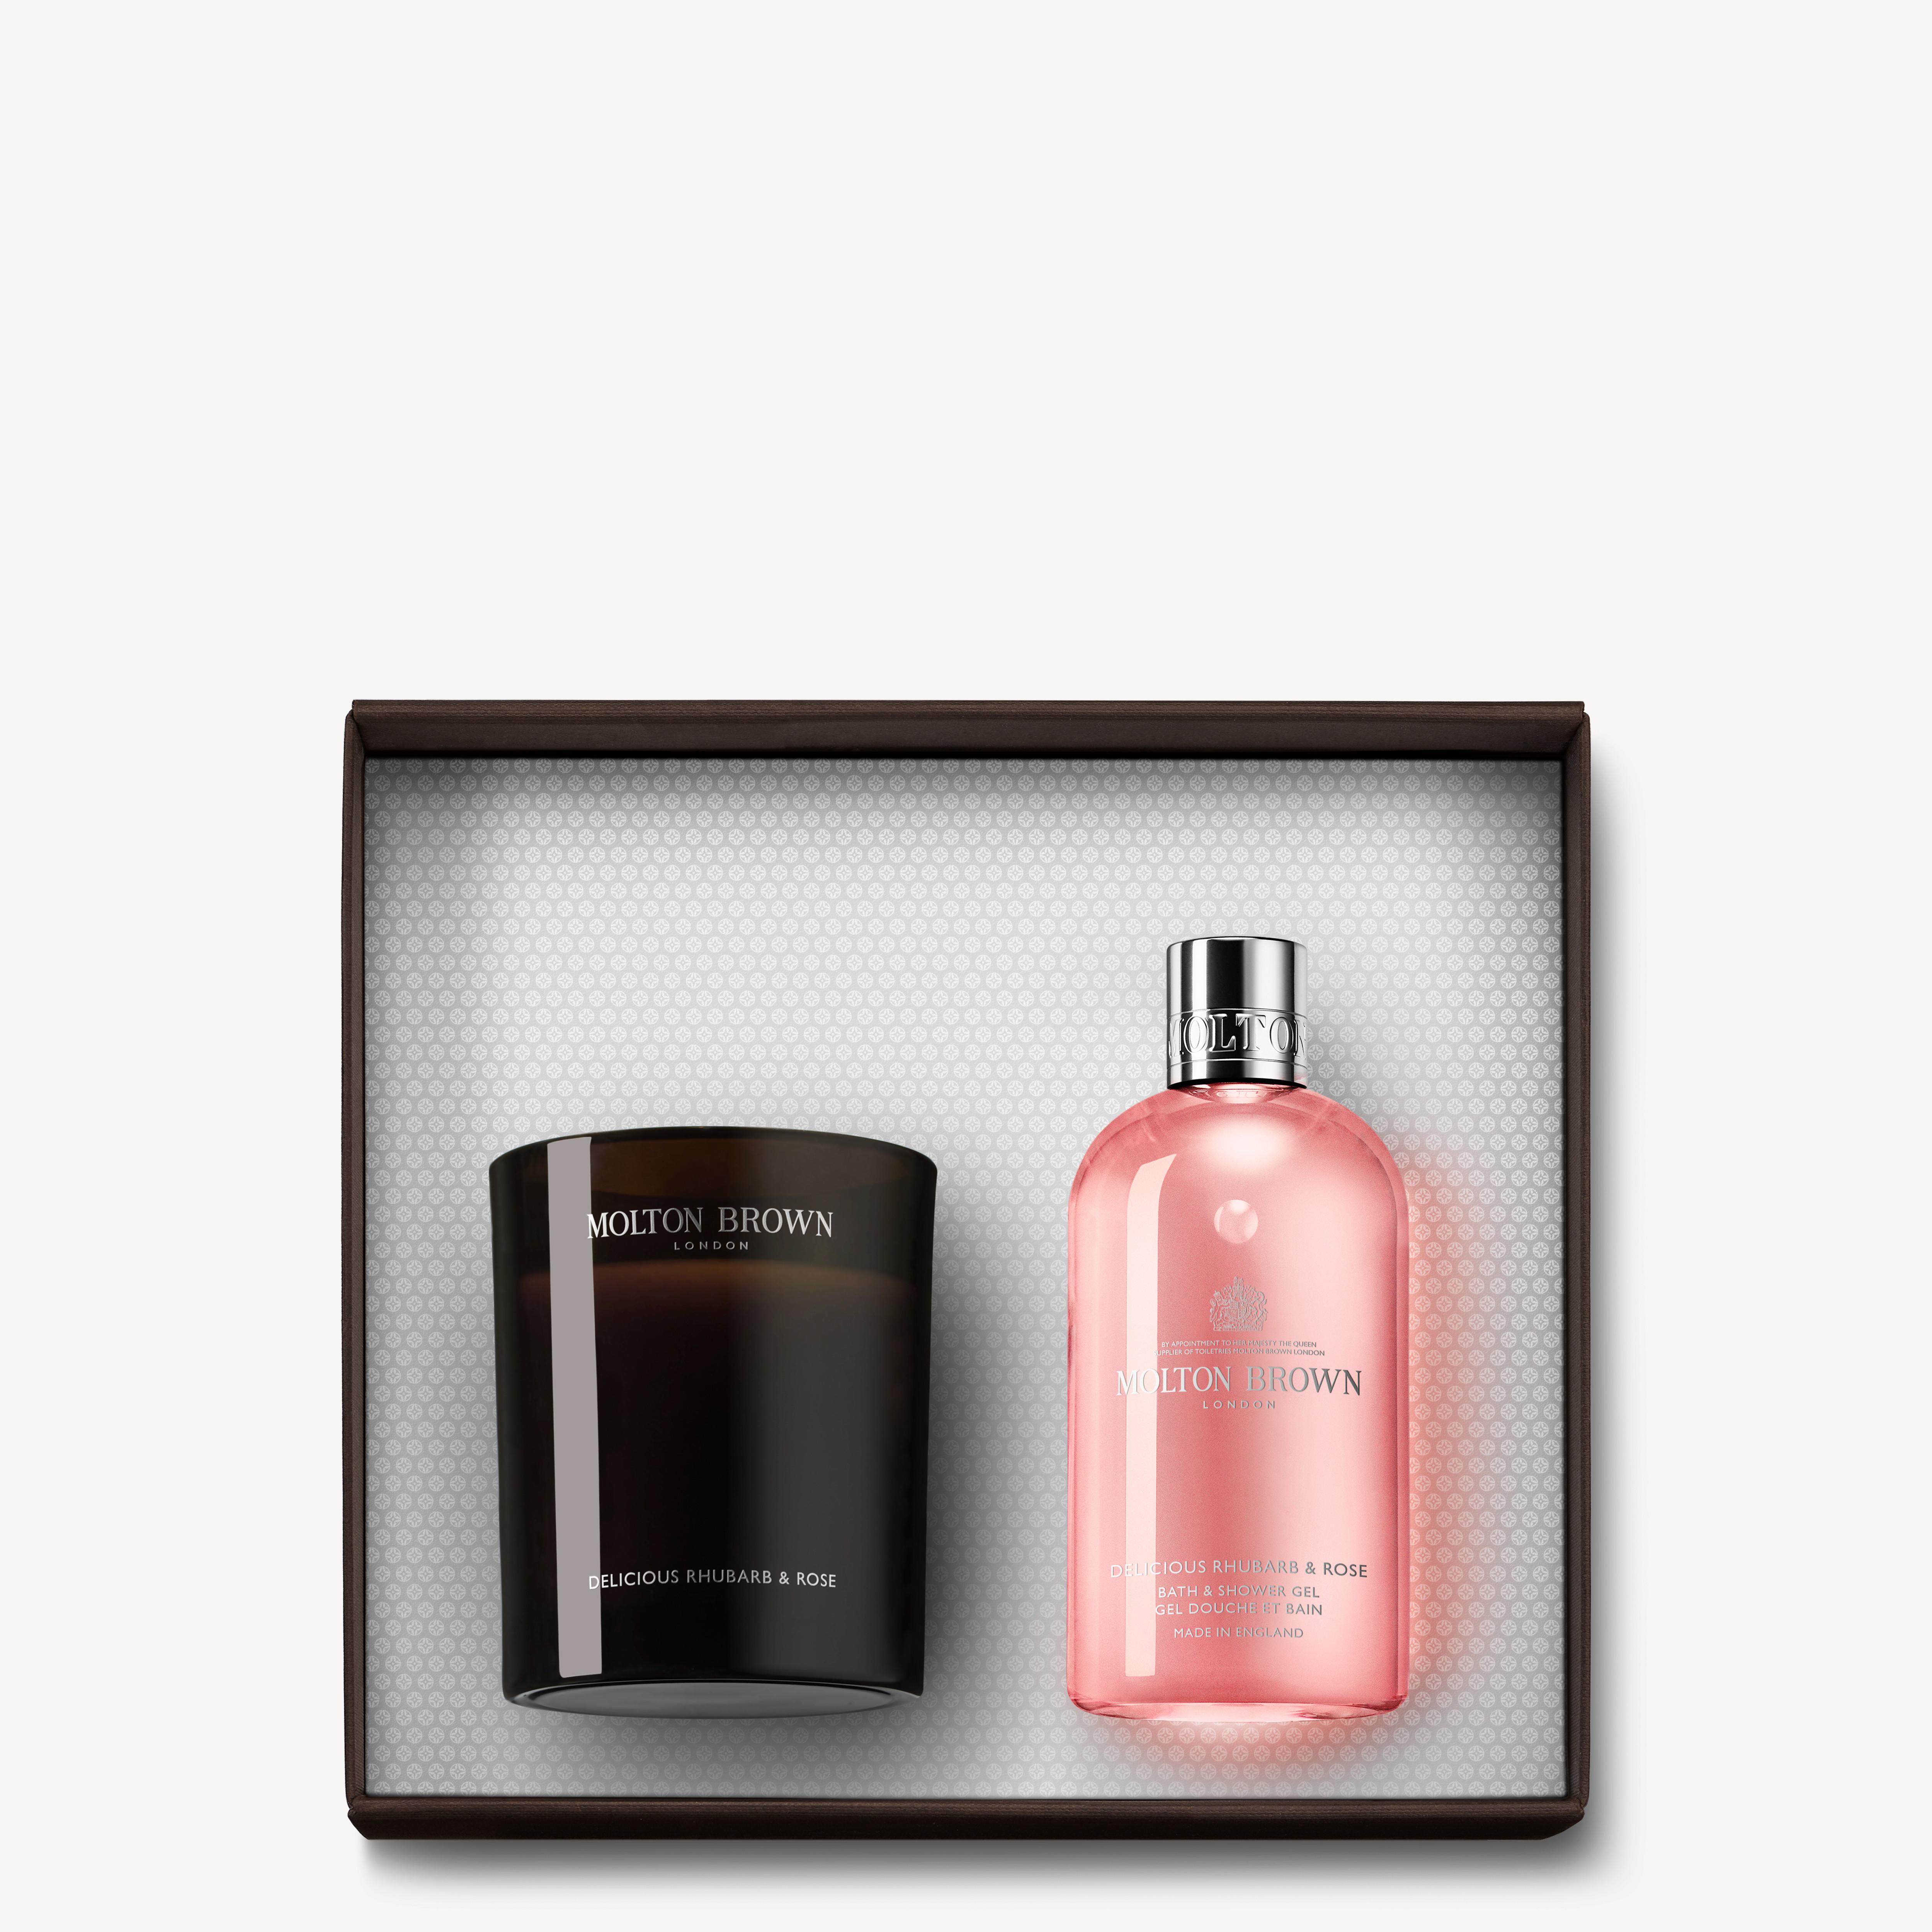 Molton Brown Delicious Rhubarb & Rose Signature Candle & Bath & Shower Gel Gift Set